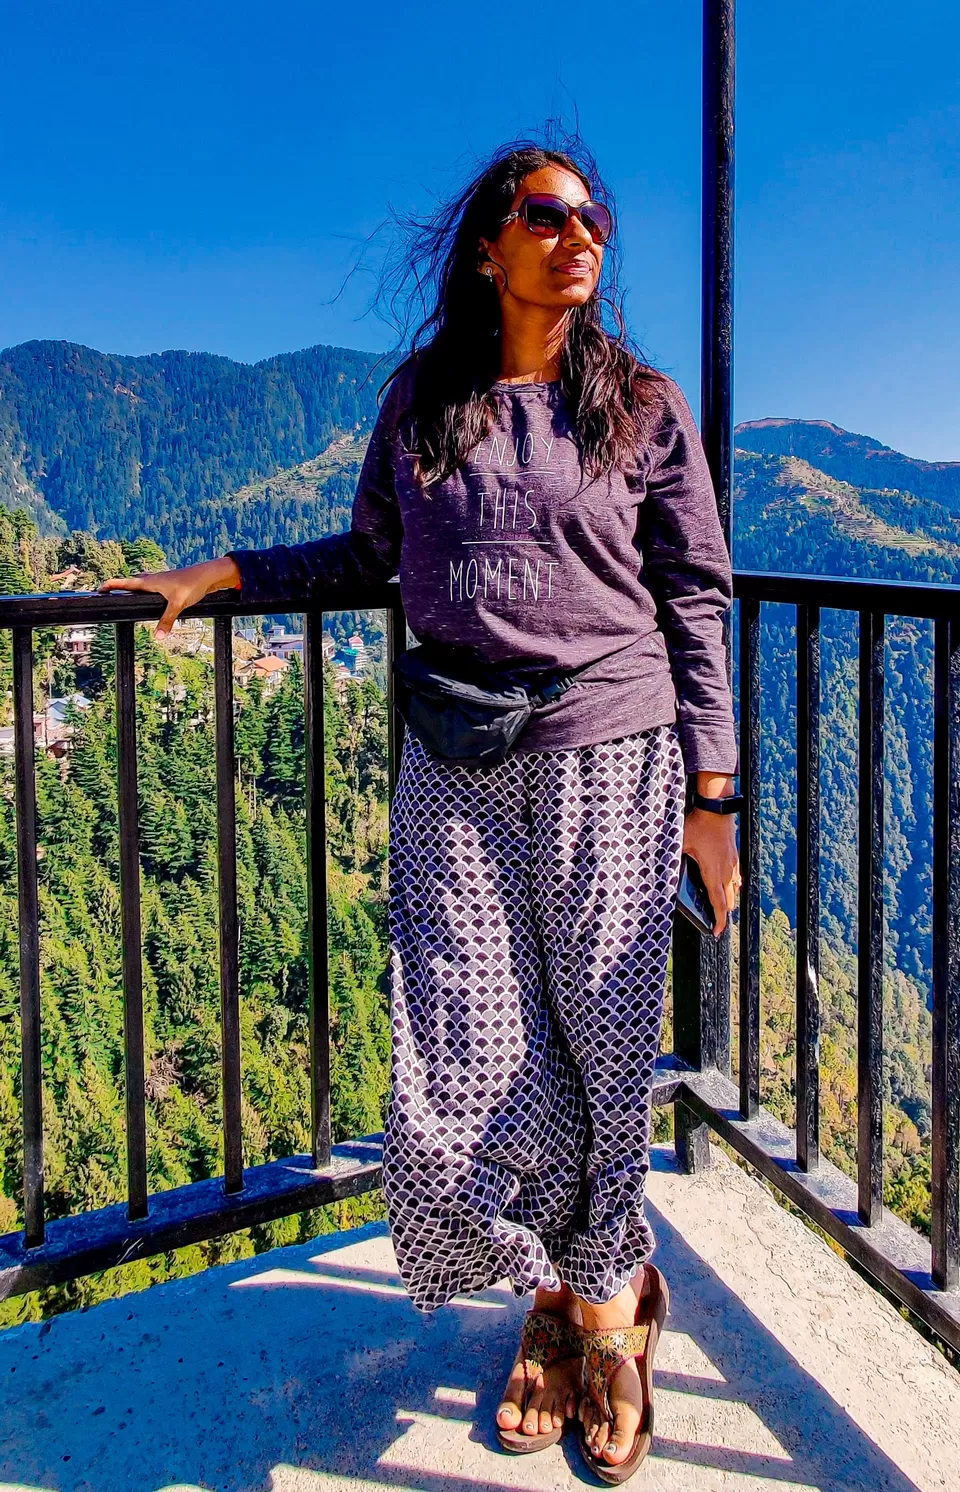 Photo of Dalhousie - Khajjiar - Mcleodganj: How I Explored the Best Of Himachal in Rs 3000 by Paridhi Agarwal